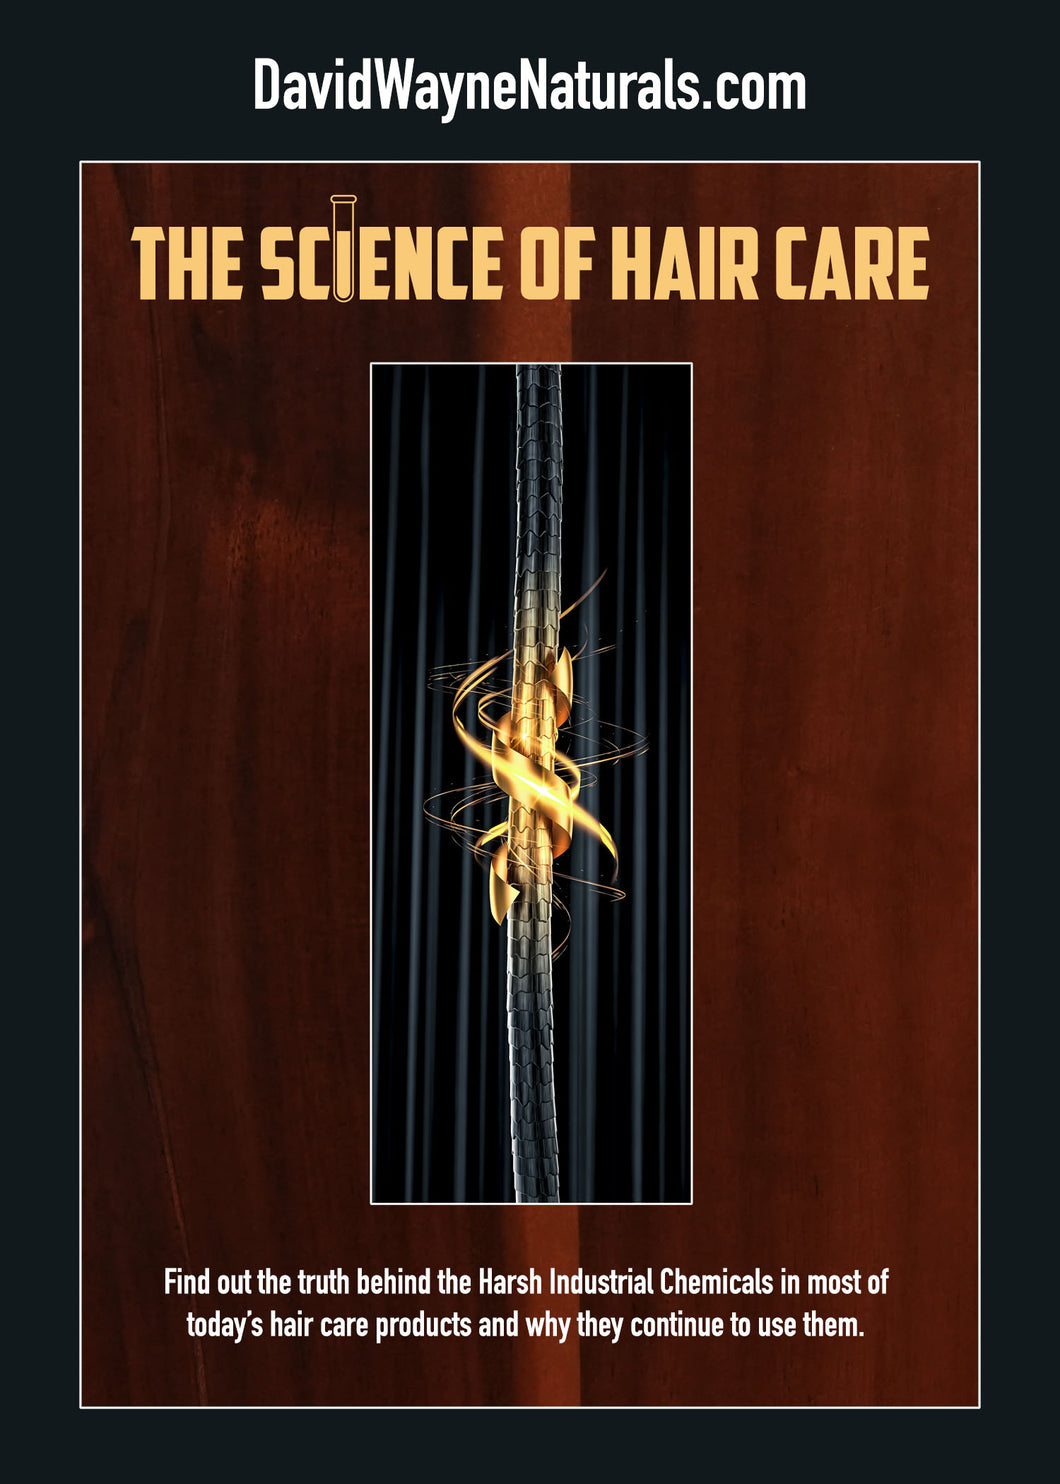 The Science of Hair Care (PDF book)